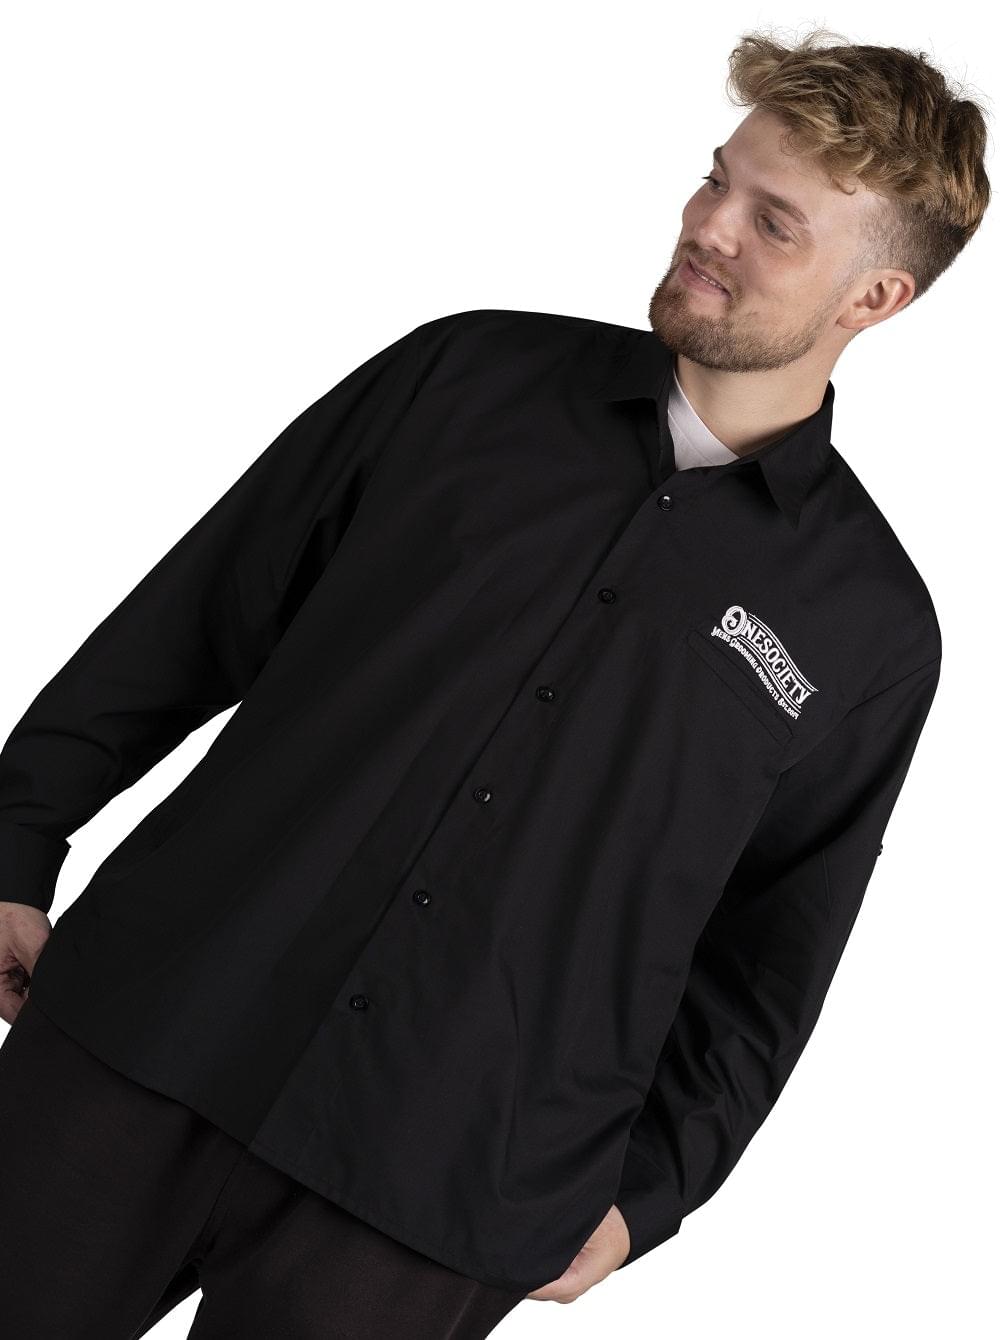 One Society Premium Black Shirt - Stand Out with Embroidered Details, Roll-Up Sleeves, and Vented Pocket. Onesociety Men's Black Thick Shacket.